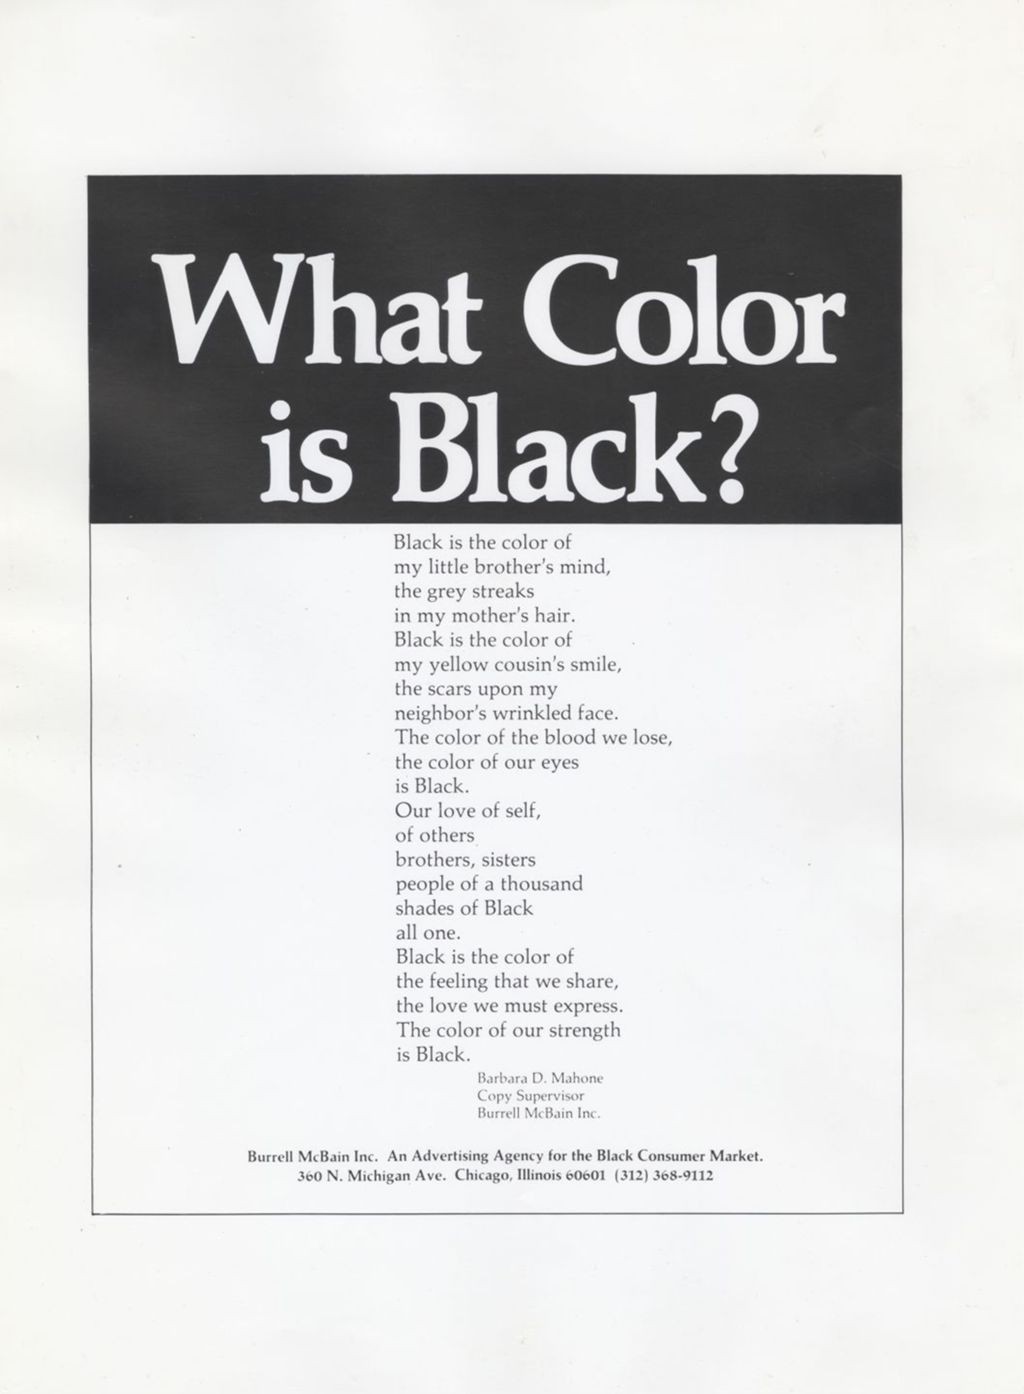 What Color is Black? advertisement